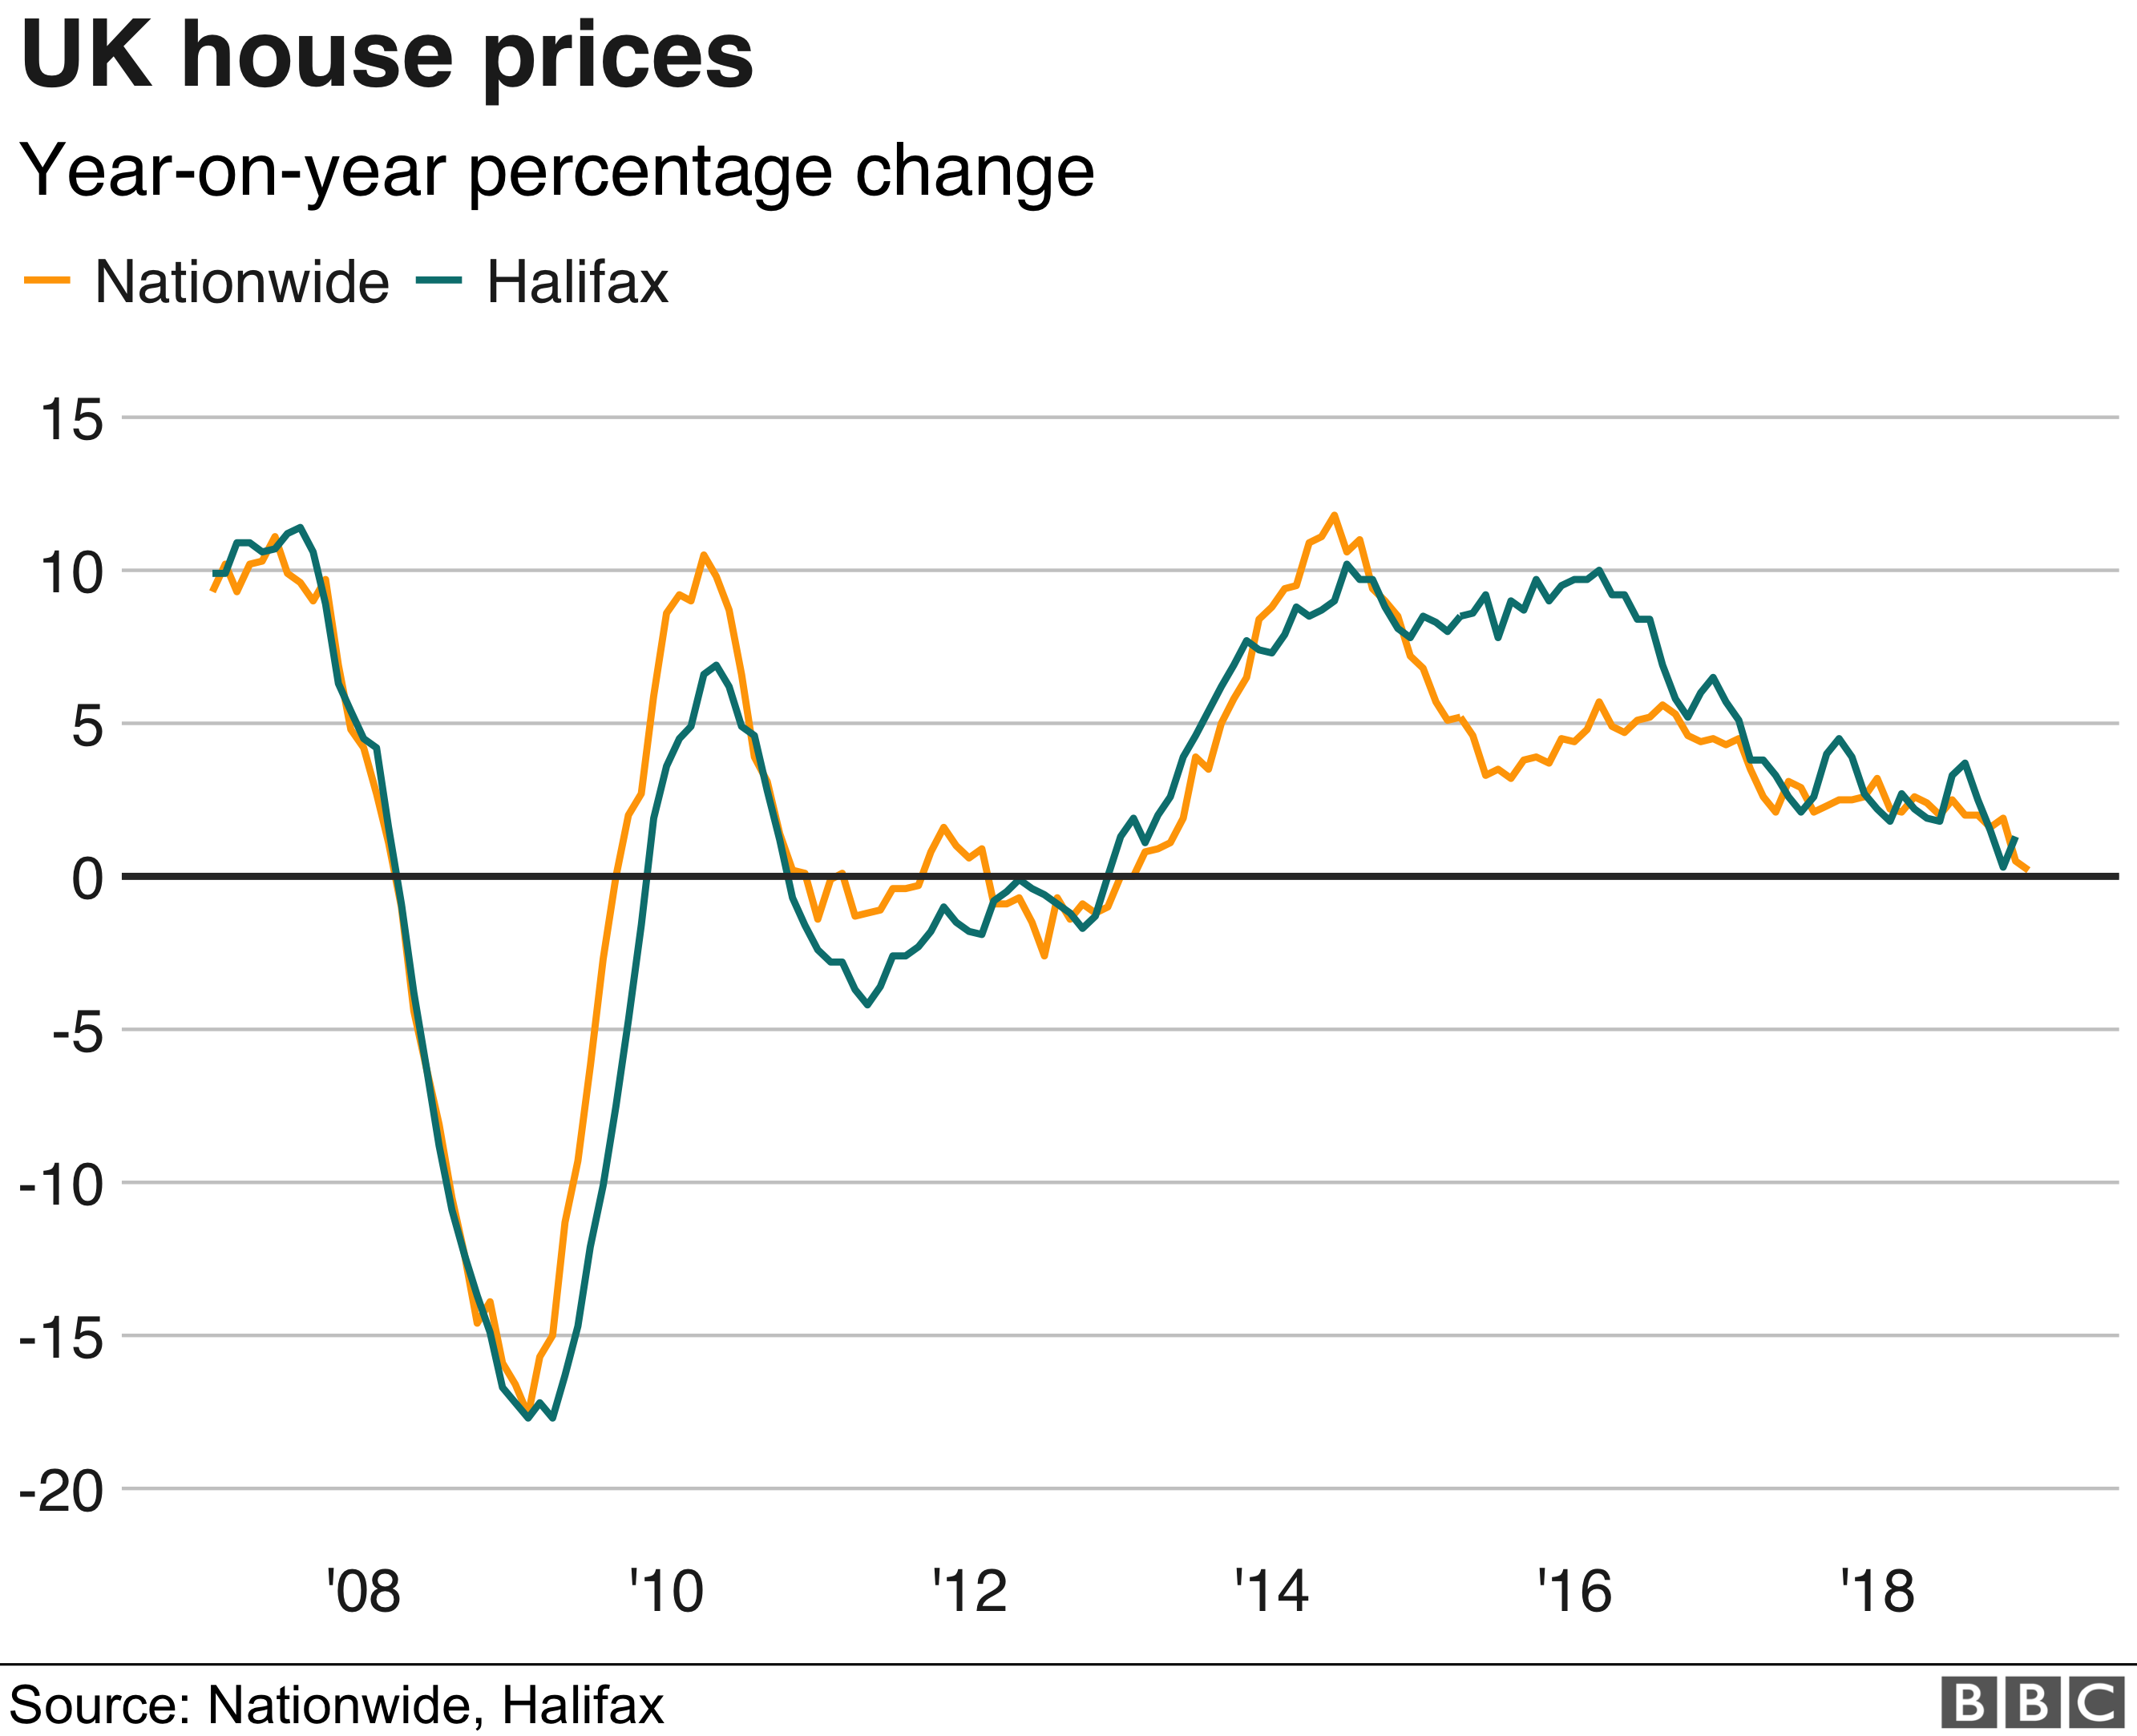 Chart showing year-on-year % house price change